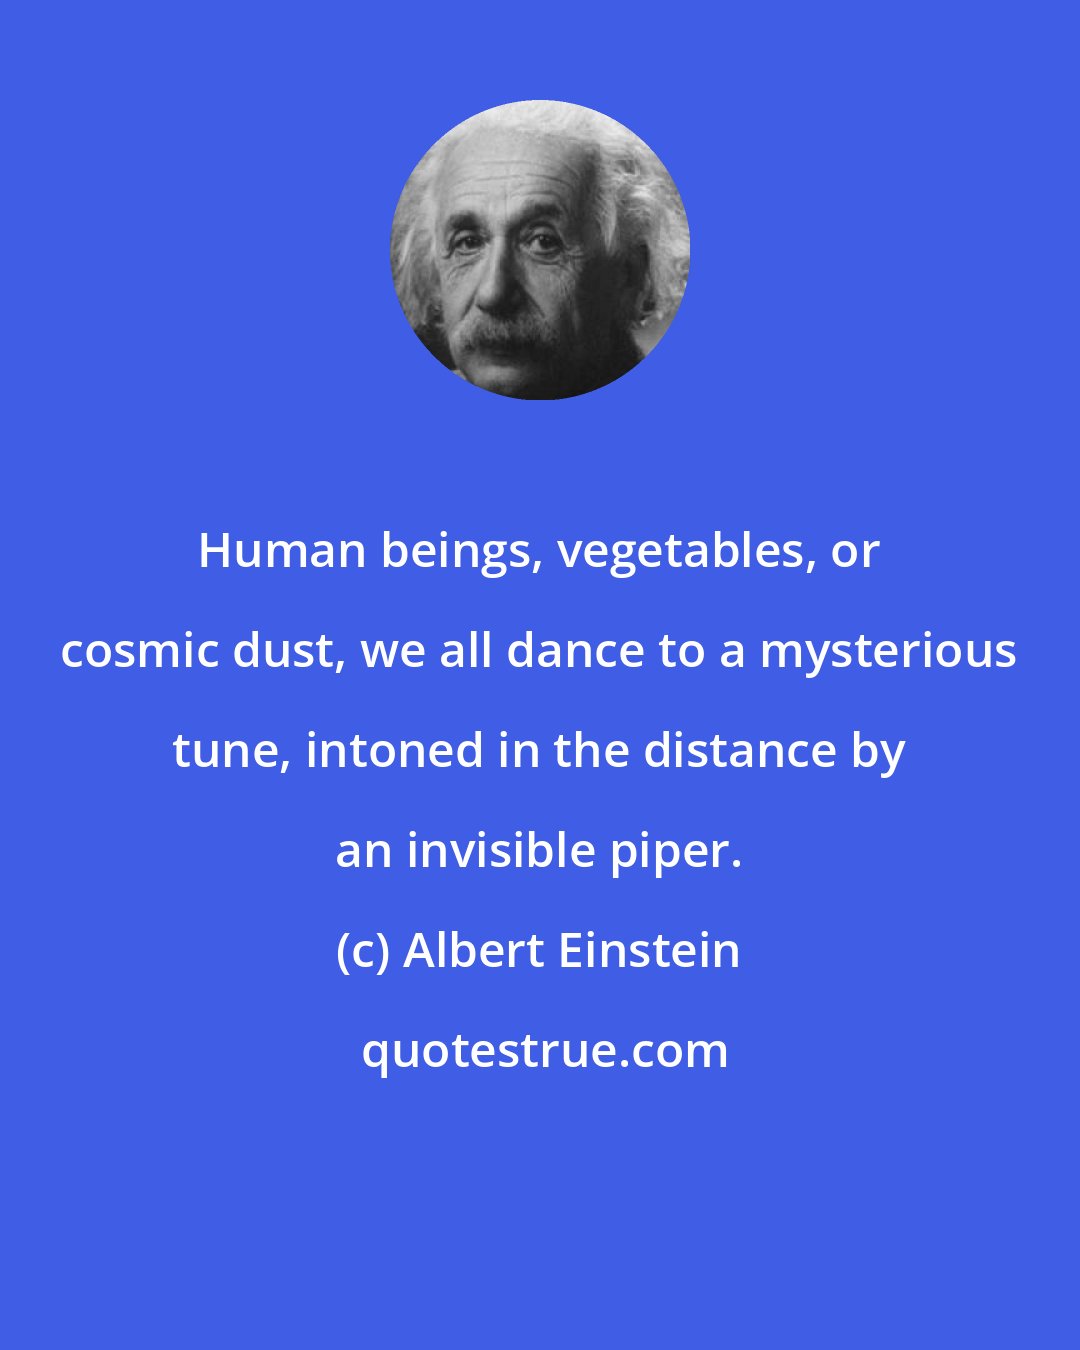 Albert Einstein: Human beings, vegetables, or cosmic dust, we all dance to a mysterious tune, intoned in the distance by an invisible piper.